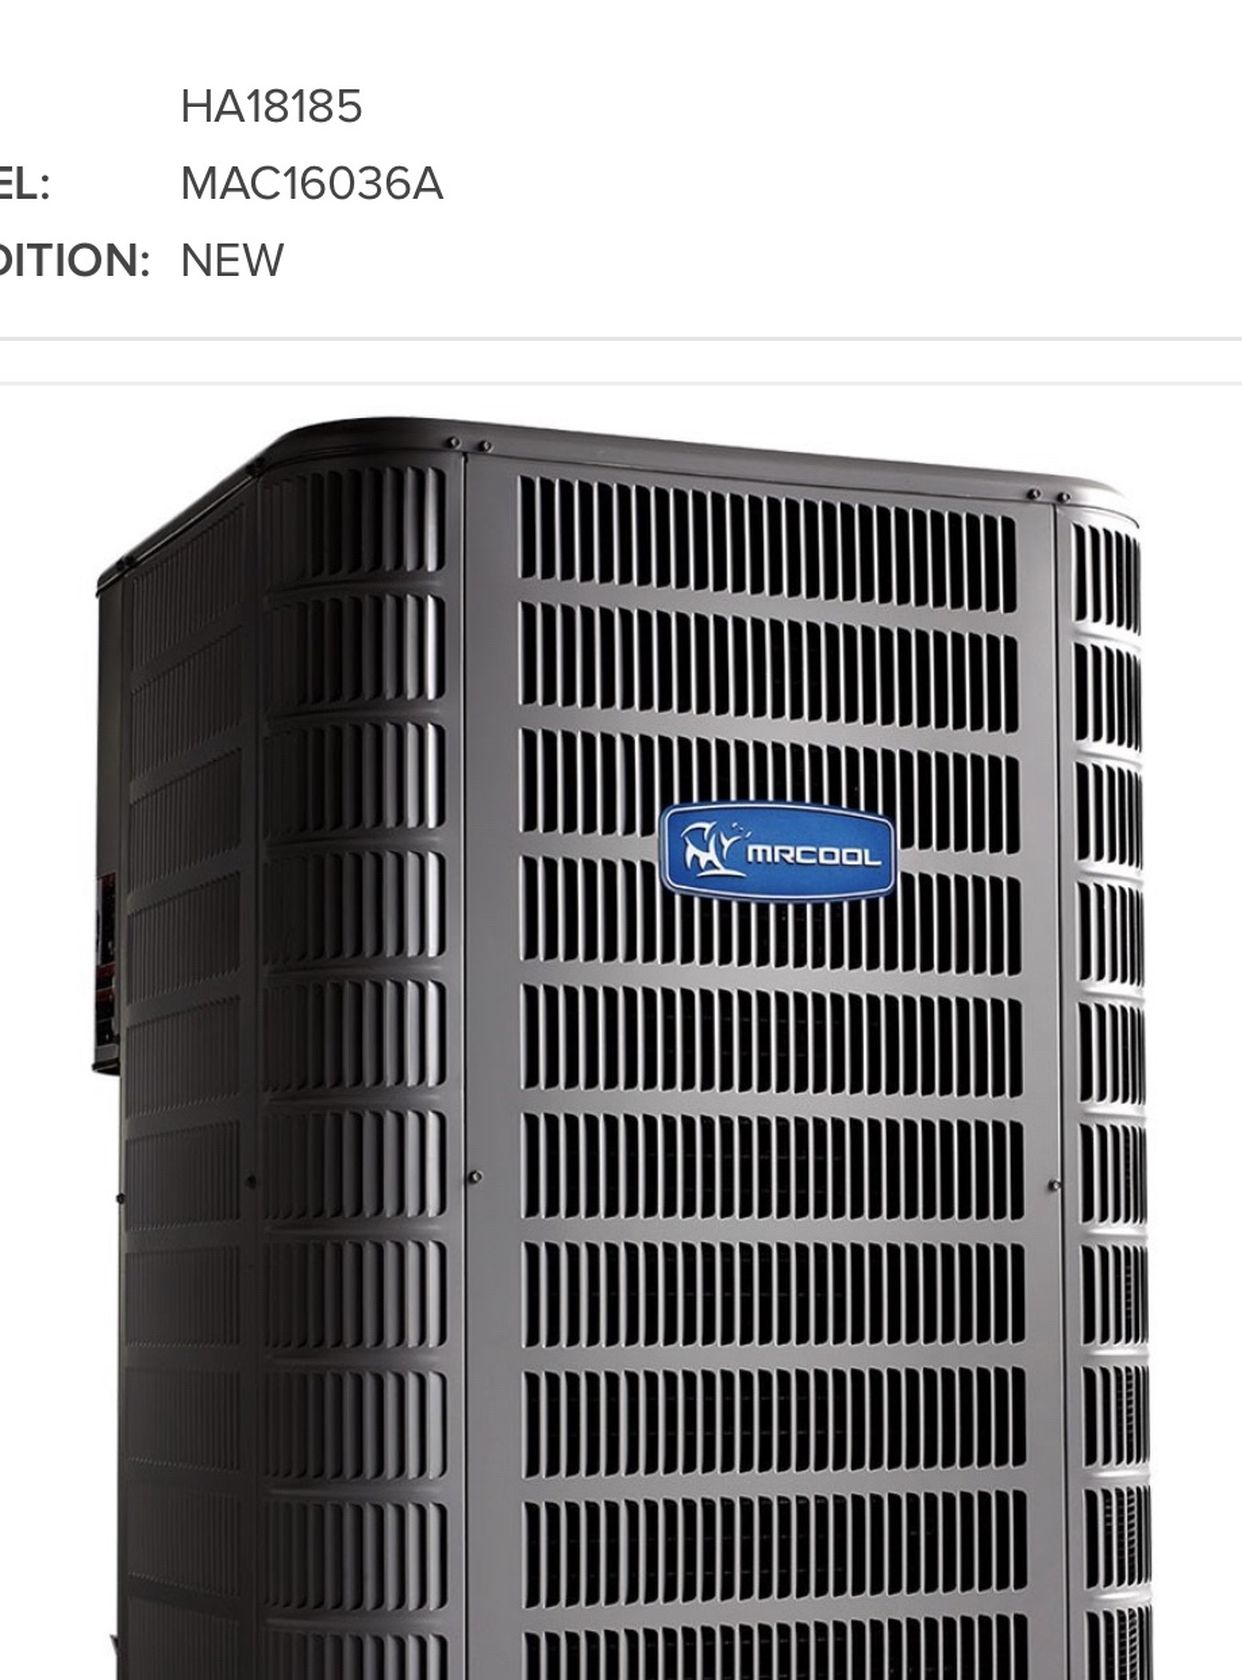 3 Ton 16 SEER MrCool Signature Central Air Conditioner Condenser ITEM: HA18185 MODEL: MAC16036A CONDITION: NEW